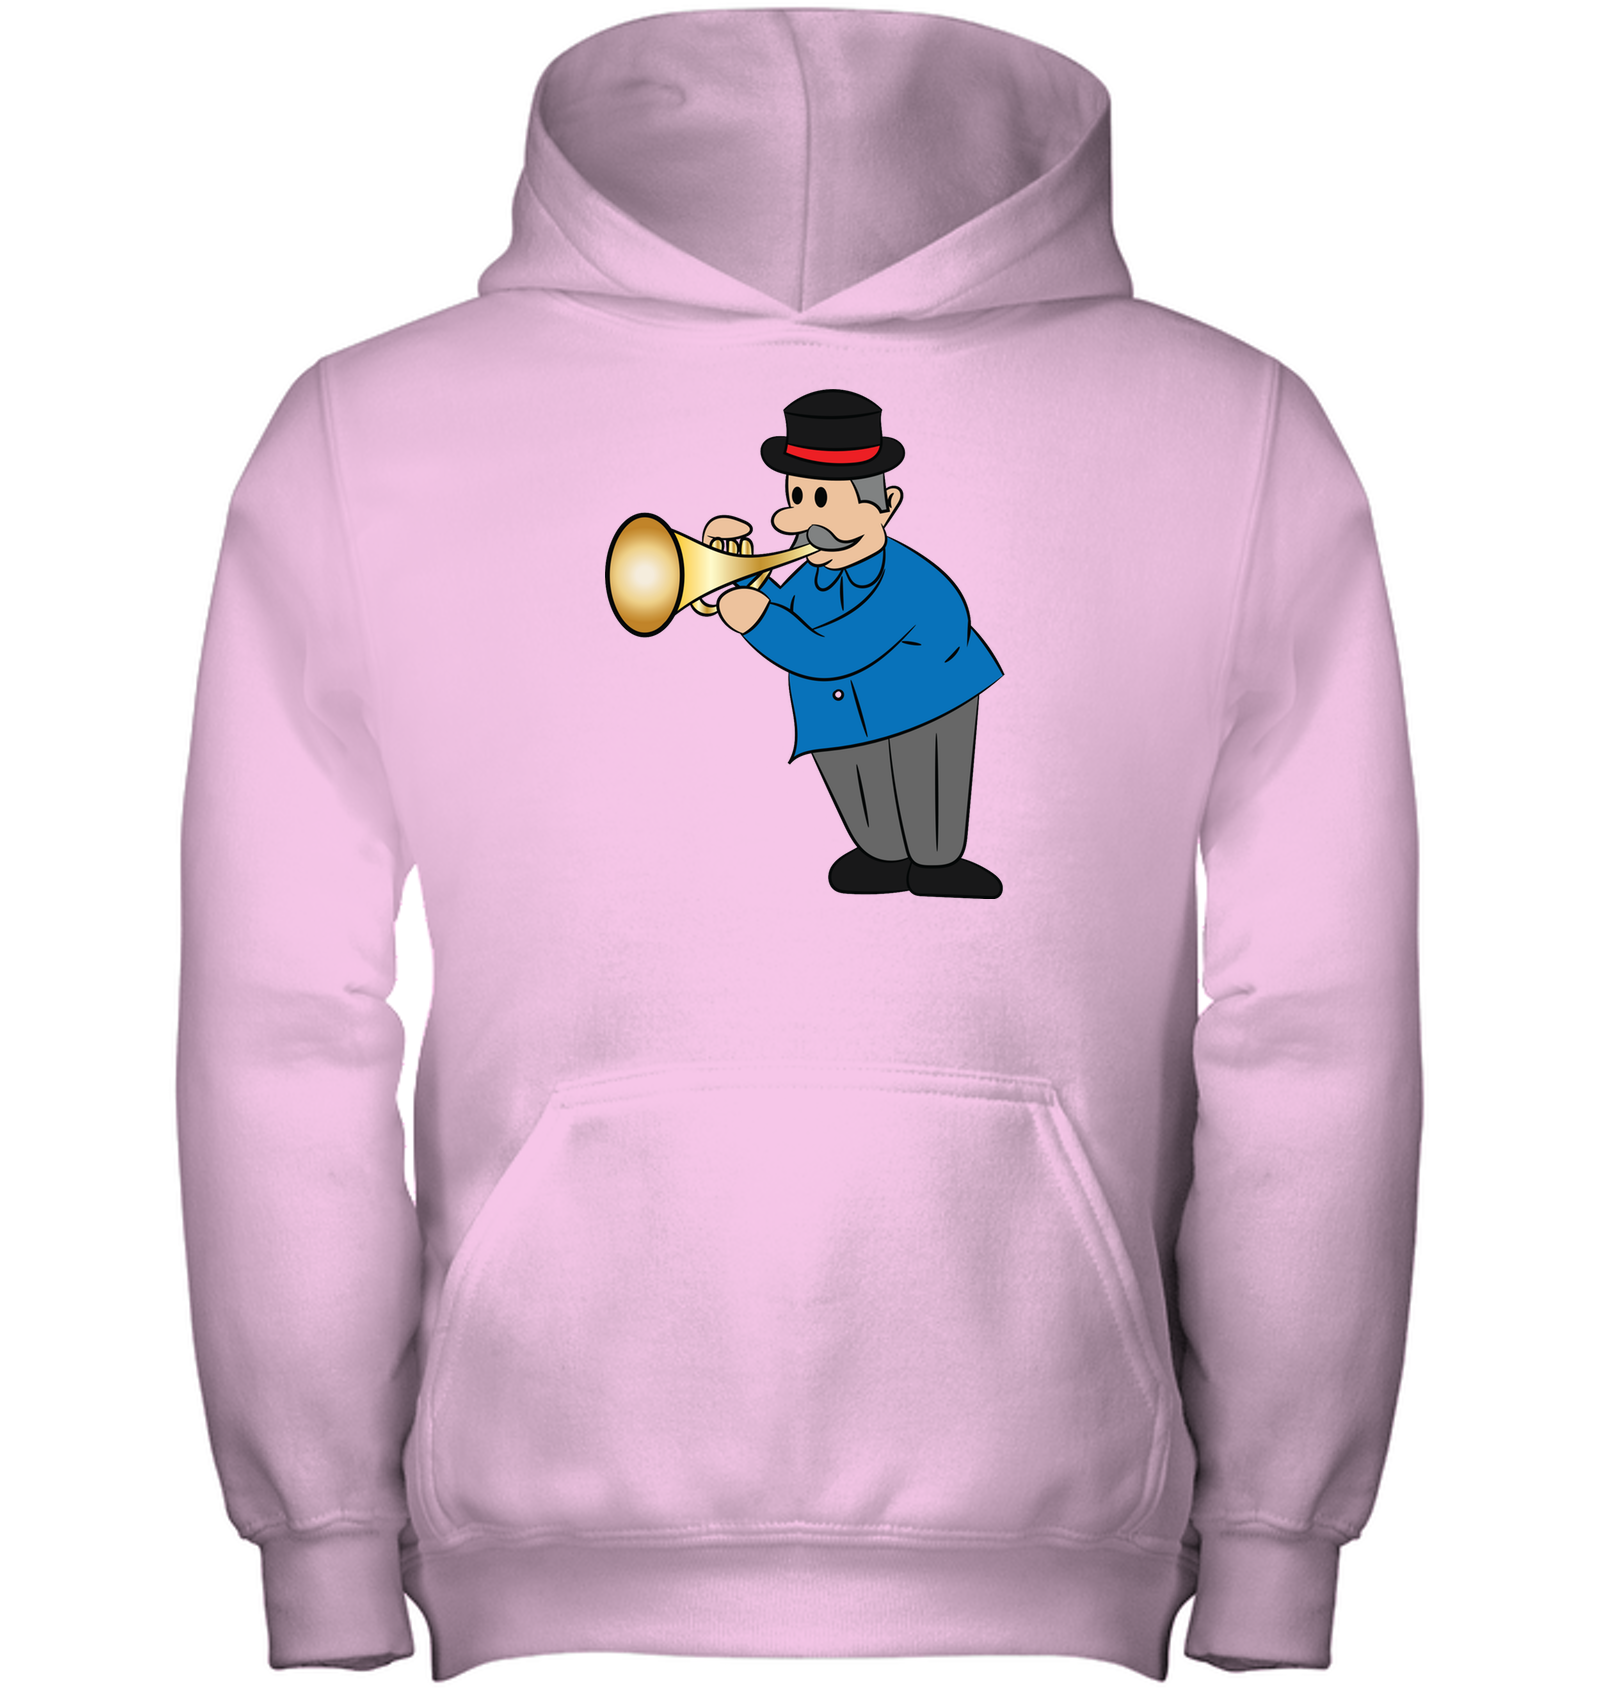 Man with Trumpet - Gildan Youth Heavyweight Pullover Hoodie